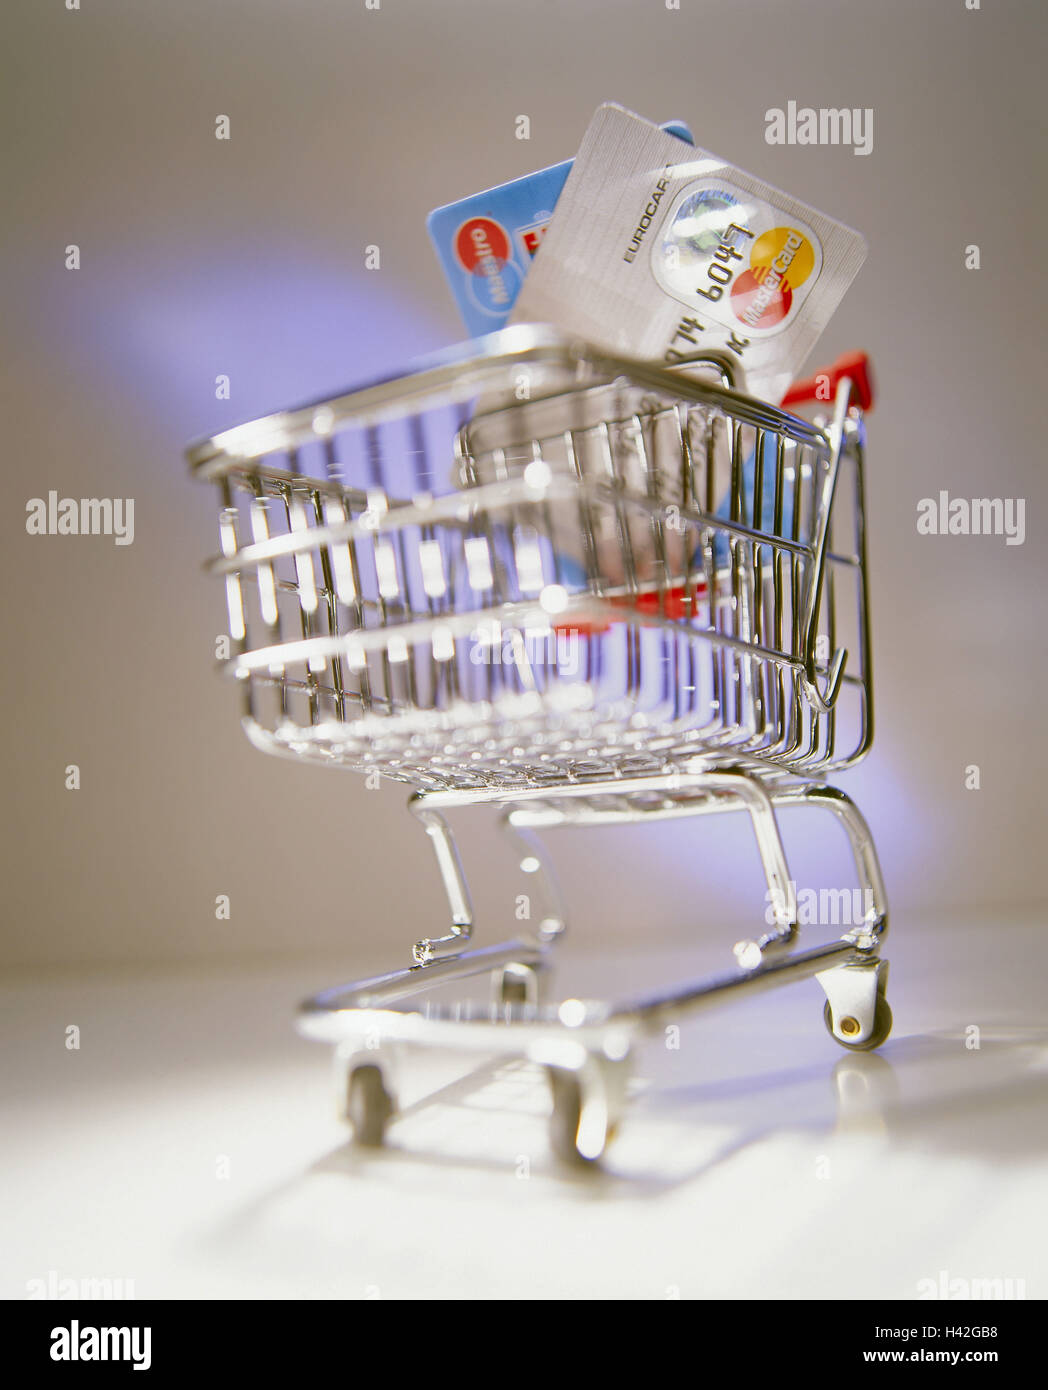 Shopping carts, credit cards, blur make purchases, shops, shopping, purchasing, technology, trade, digitally, miniature shopping carts, payment, by transfer, means payment, Still life, product photography, conception, idea, studio Stock Photo